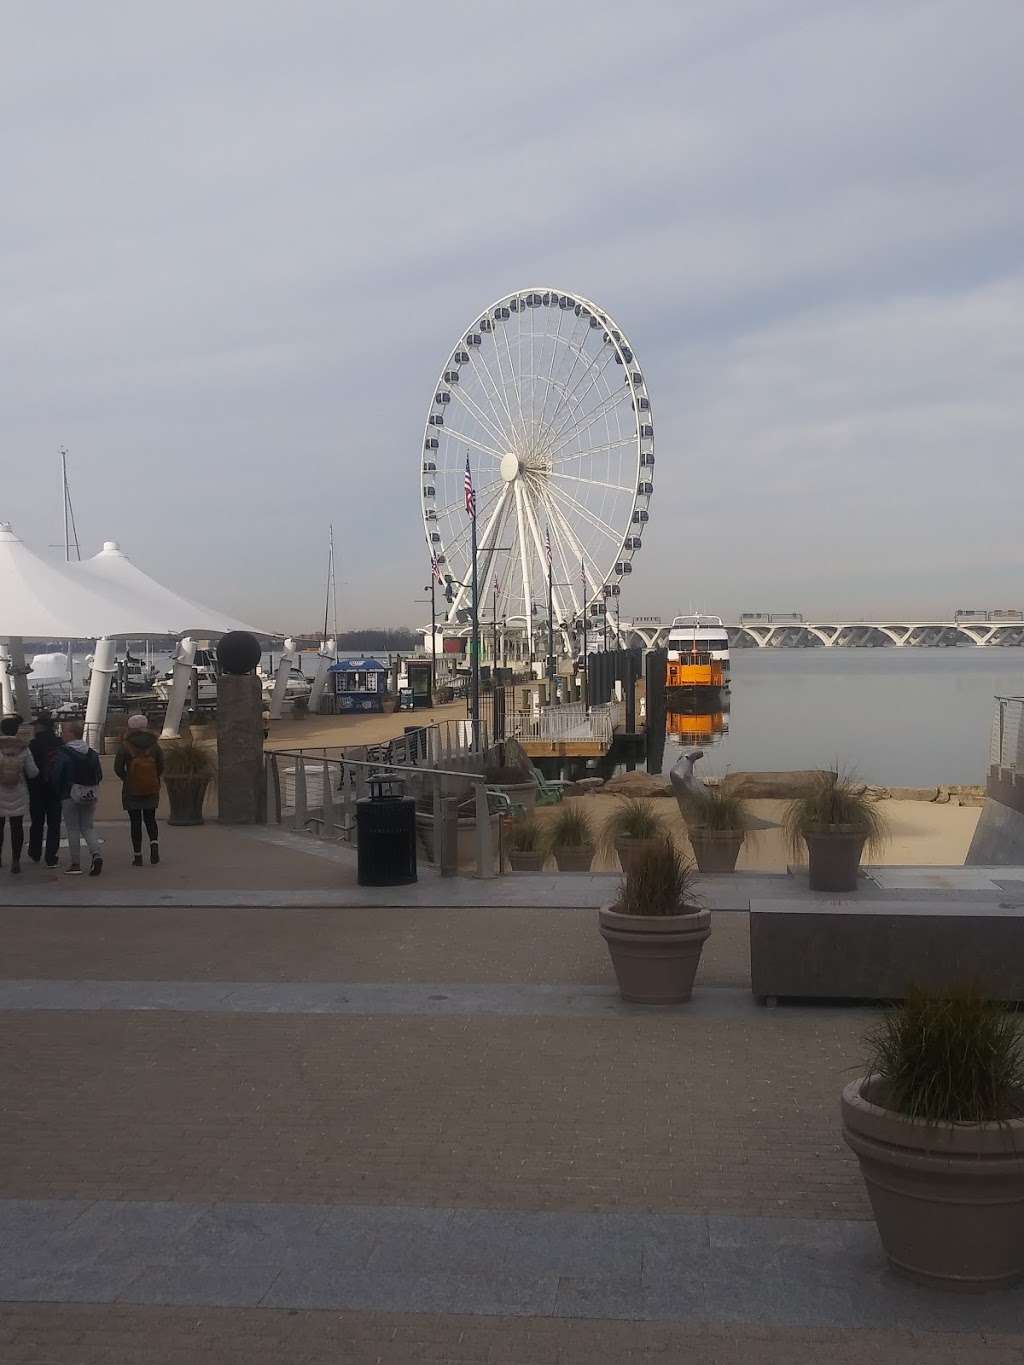 Gaylord National Harbor | 801 National Harbor Blvd, Oxon Hill, MD 20745